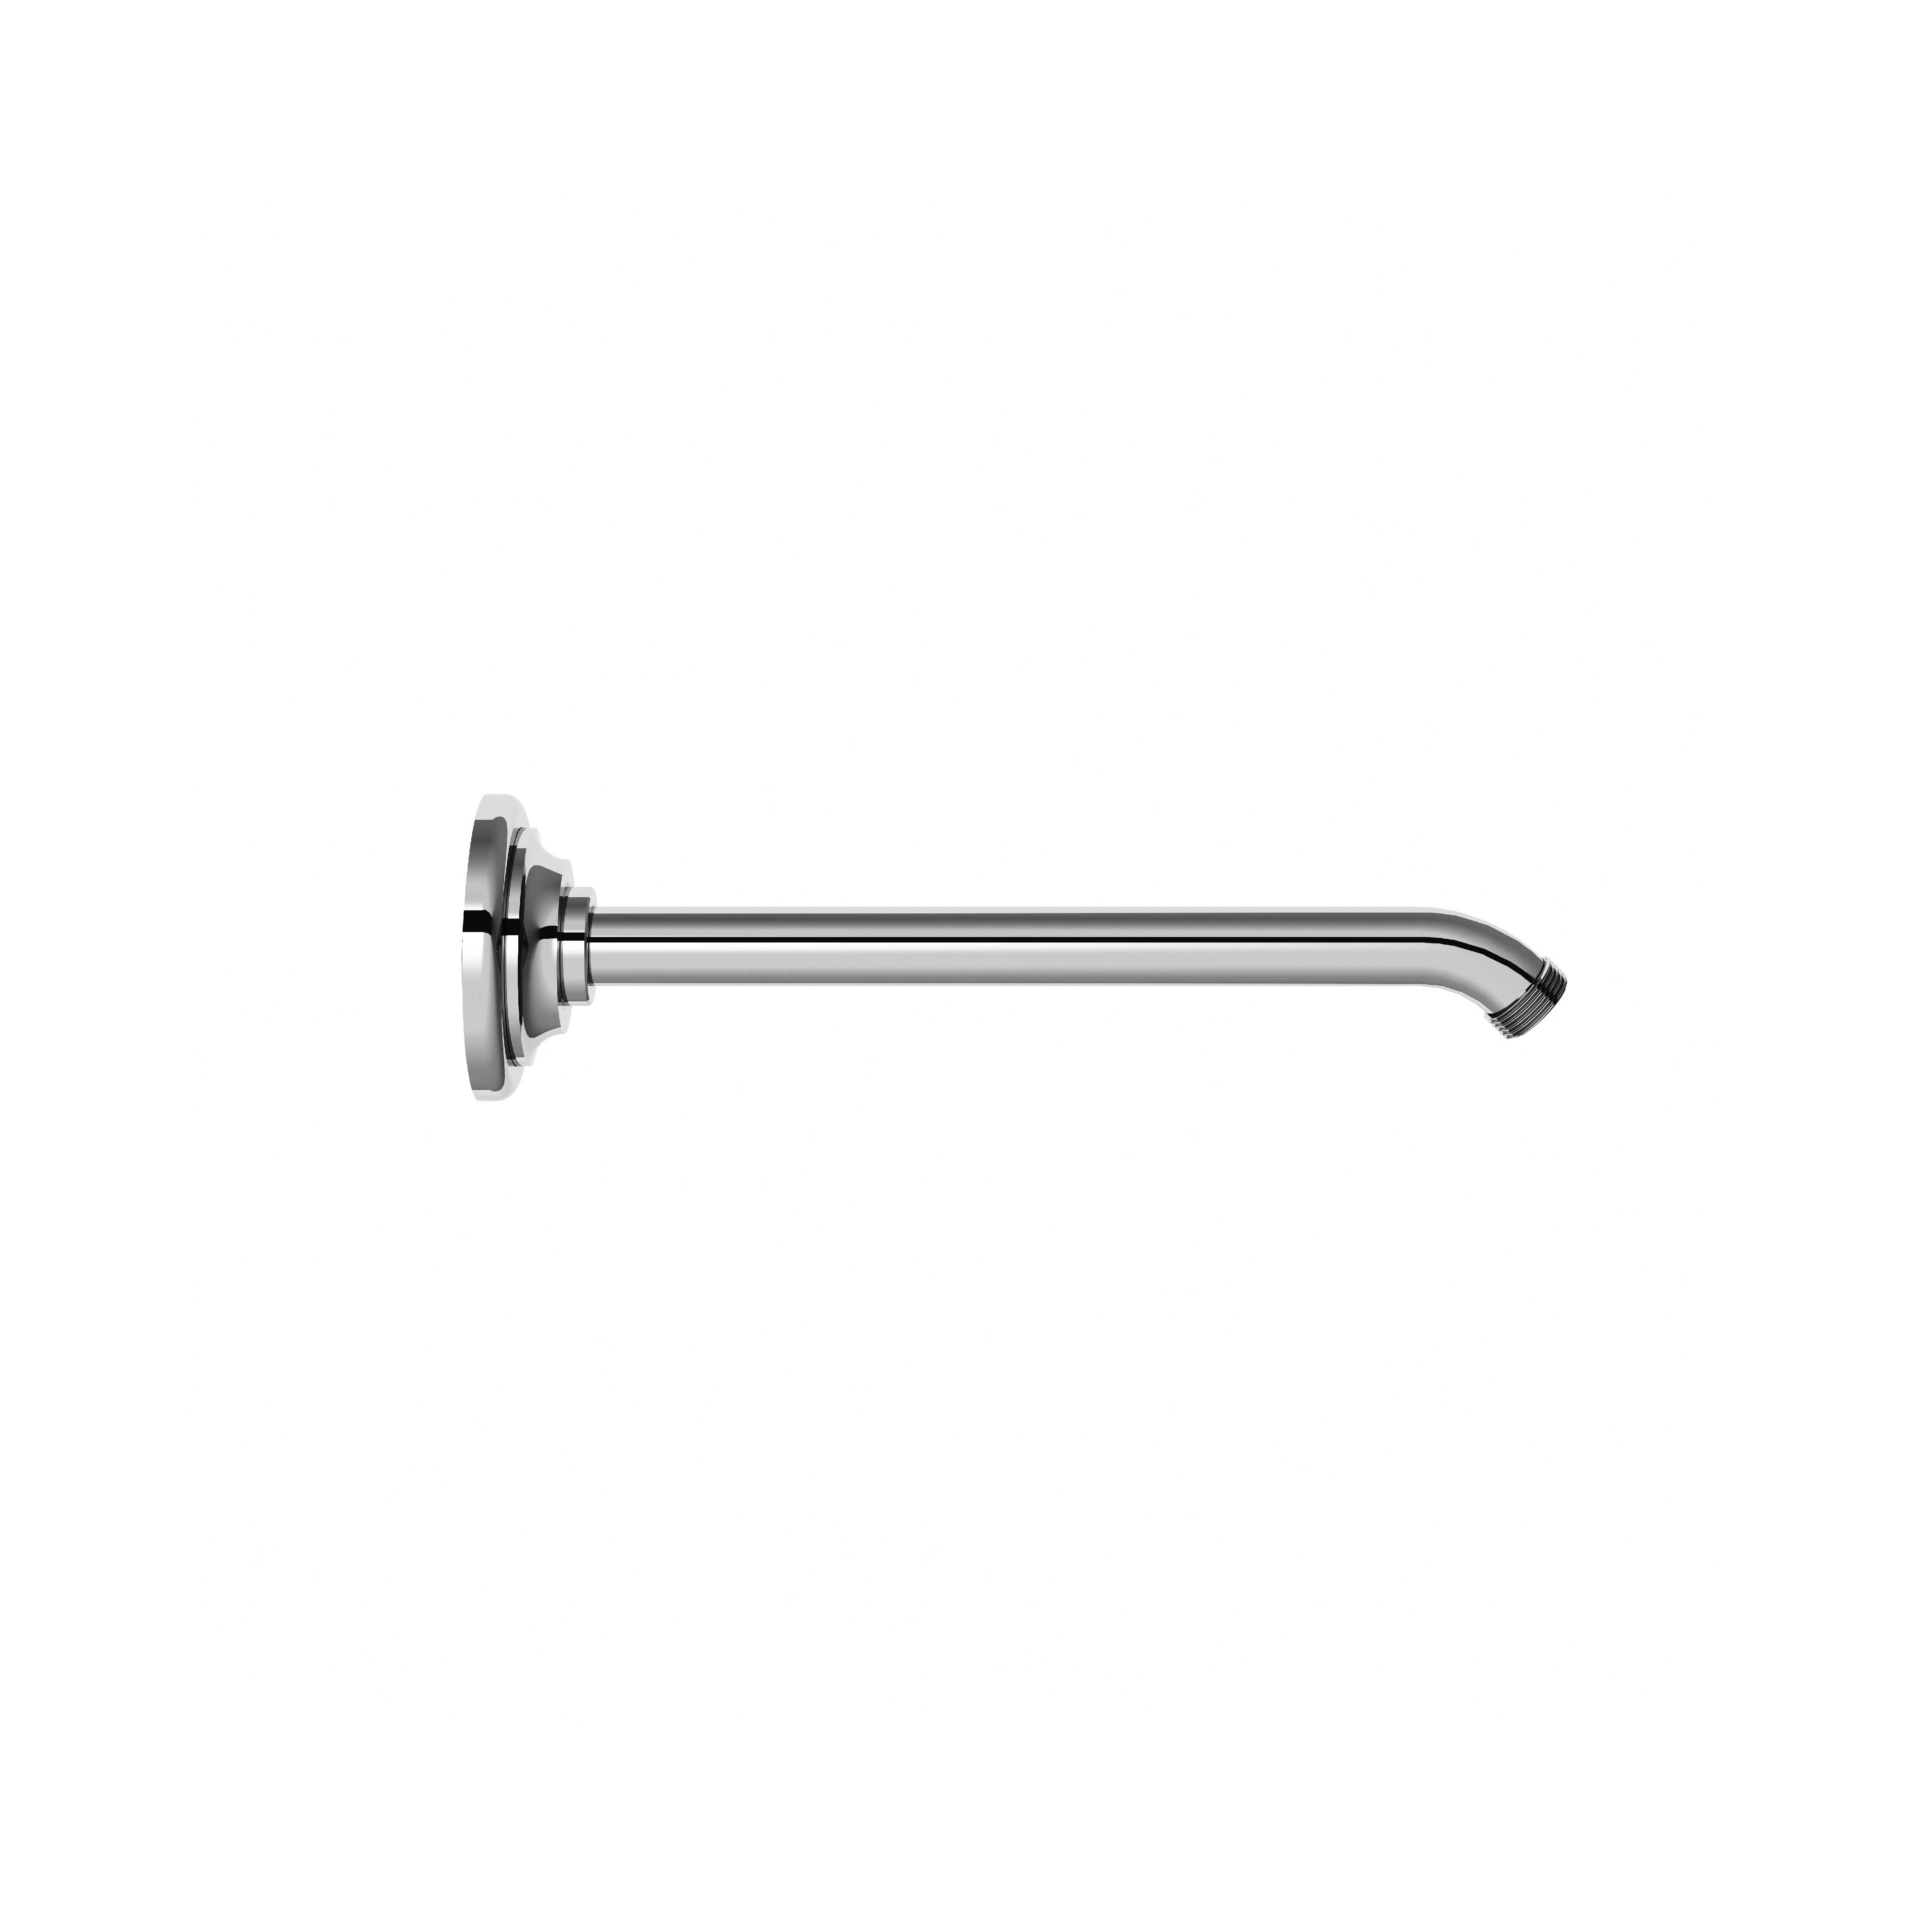 M01-2W170 Wall mounted shower arm 170mm